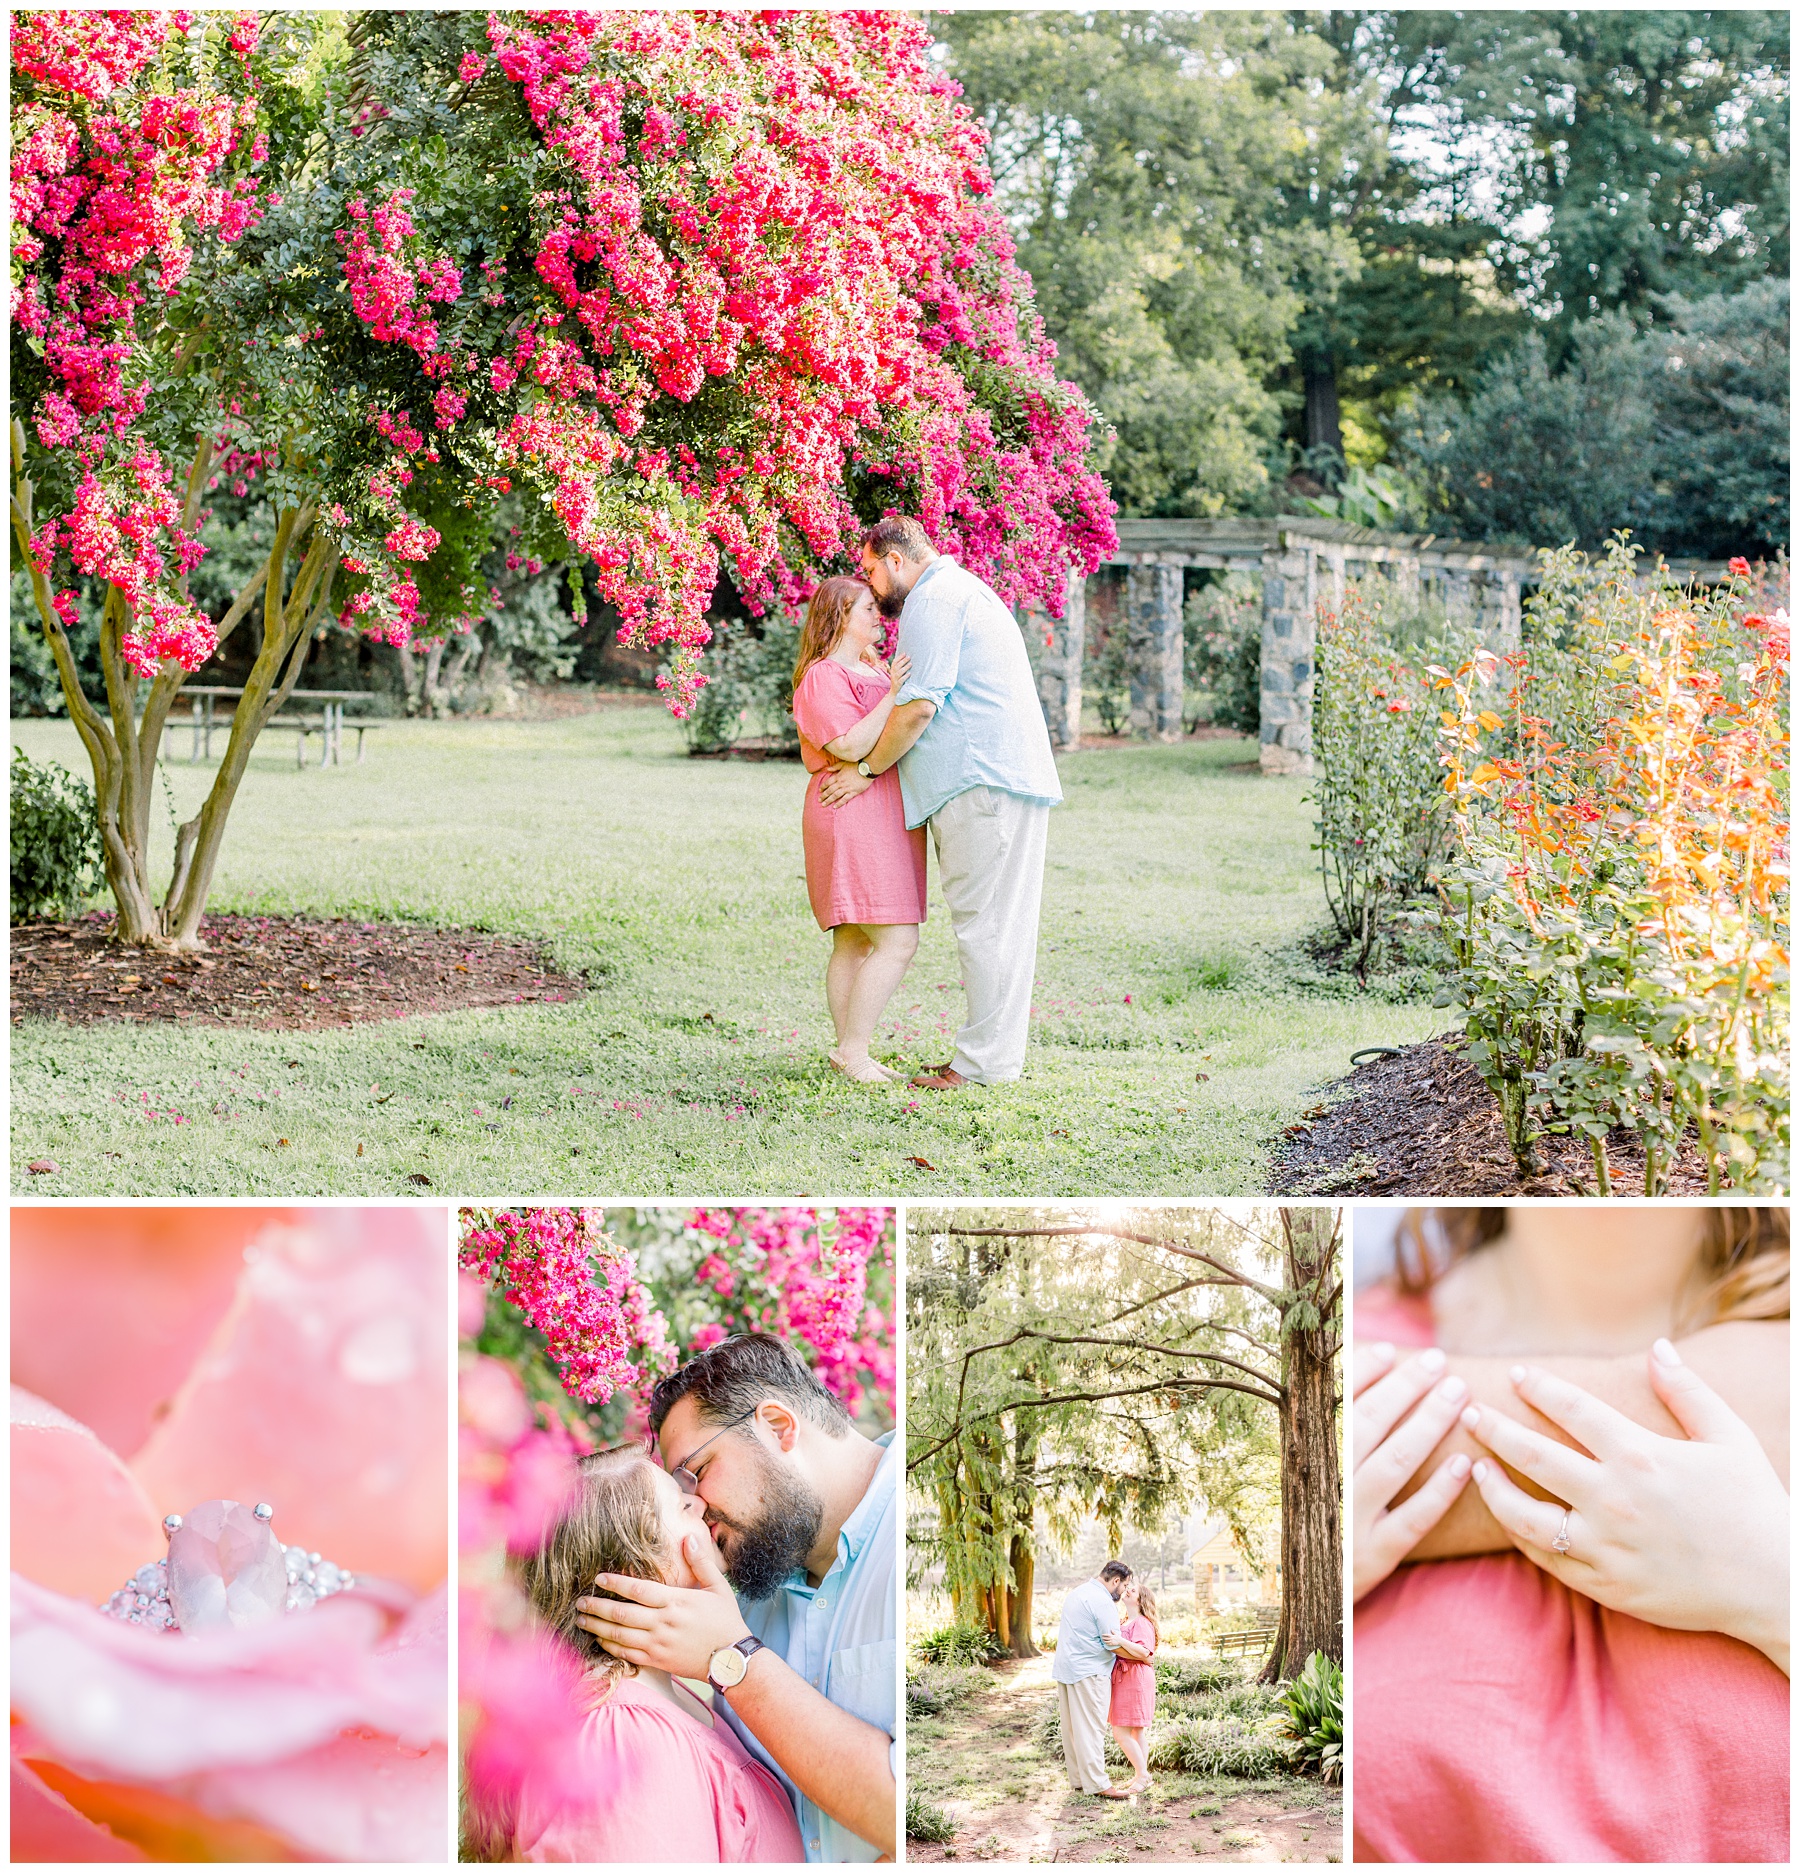 Raleigh Rose Garden Engagement Session In Raleigh North Carolina